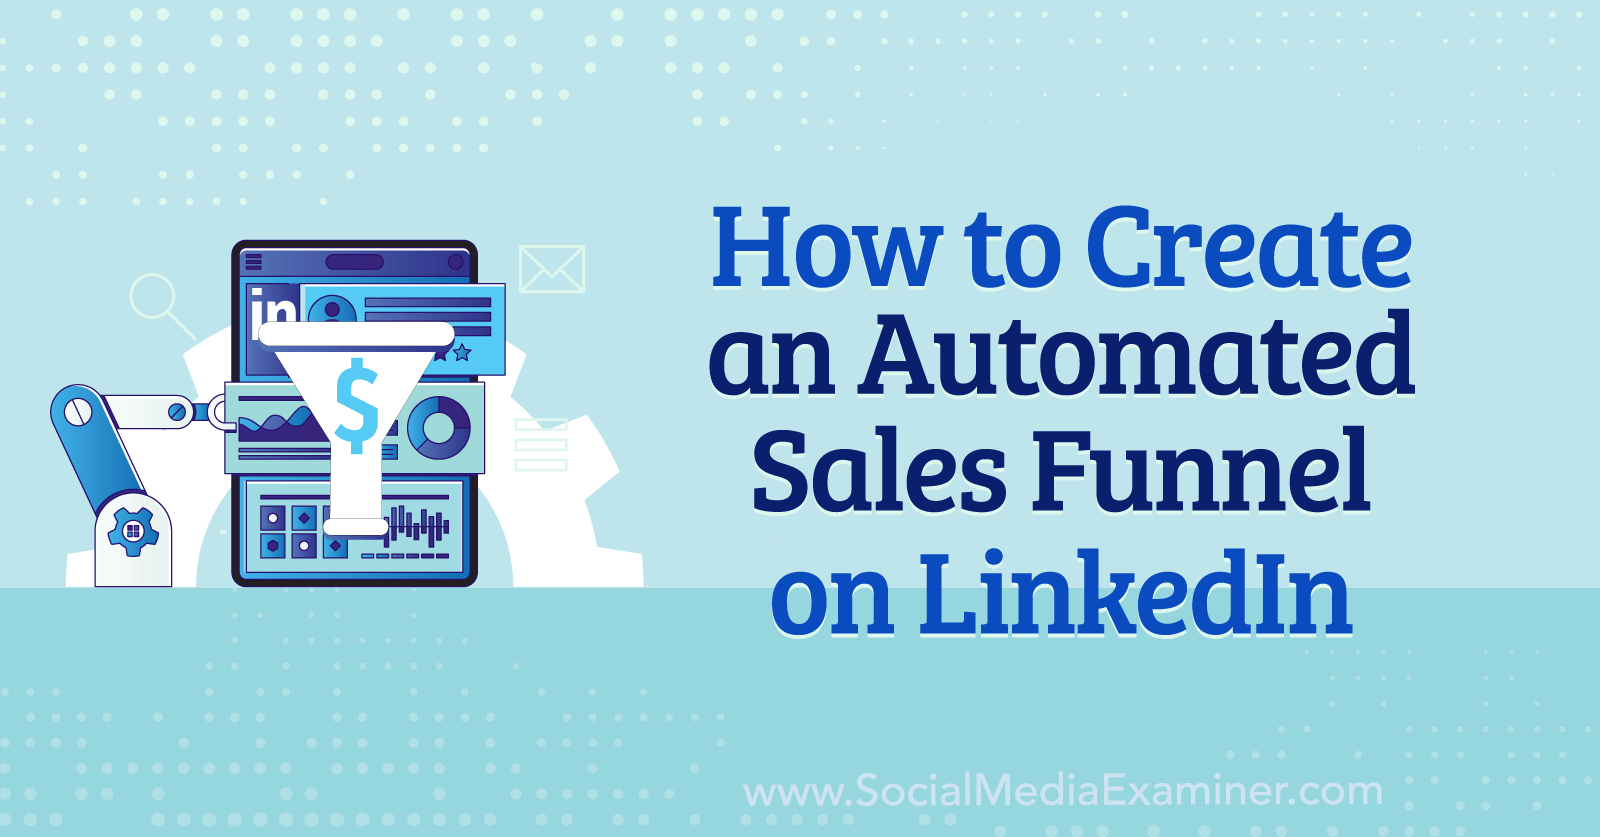 How to Create an Automated Sales Funnel on LinkedIn by Anna Sonnenberg on Social Media Examiner.